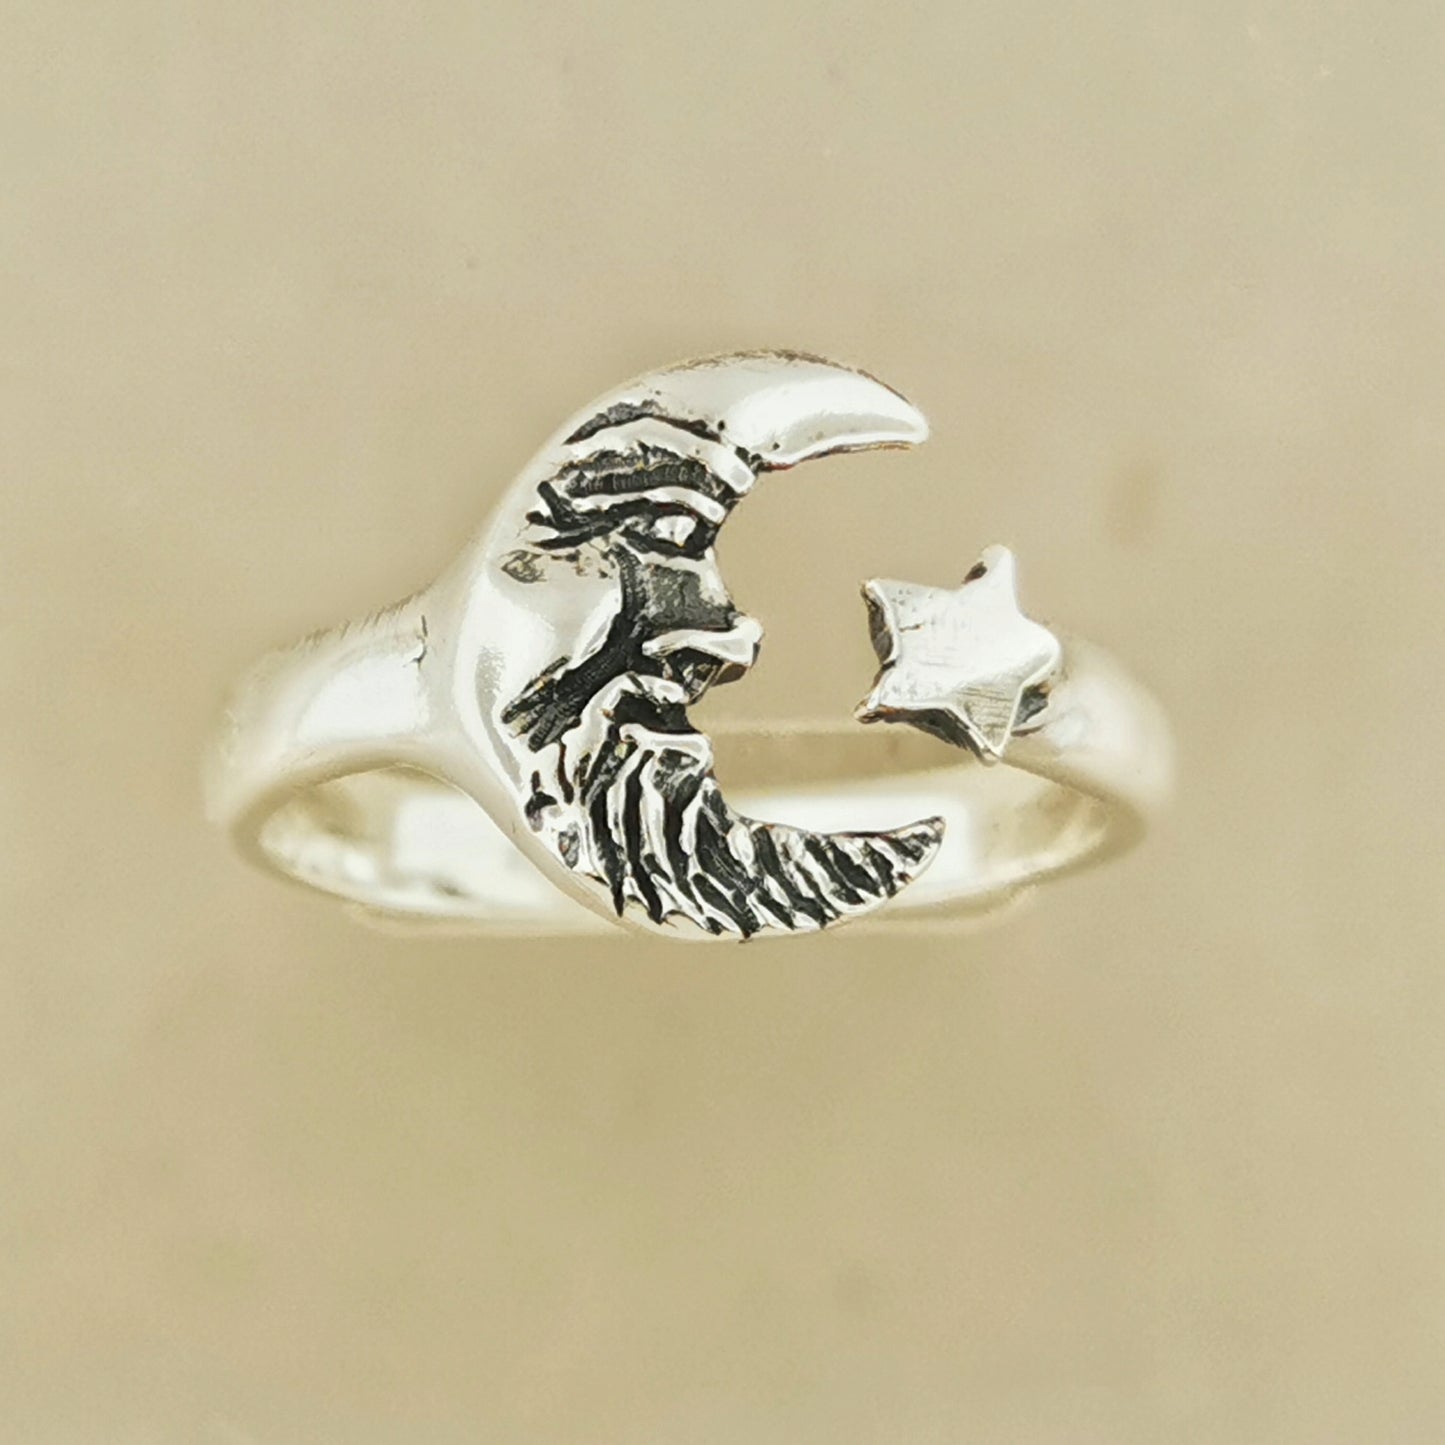 Man In The Moon Adjustable Ring In Sterling Silver Or Antique Bronze